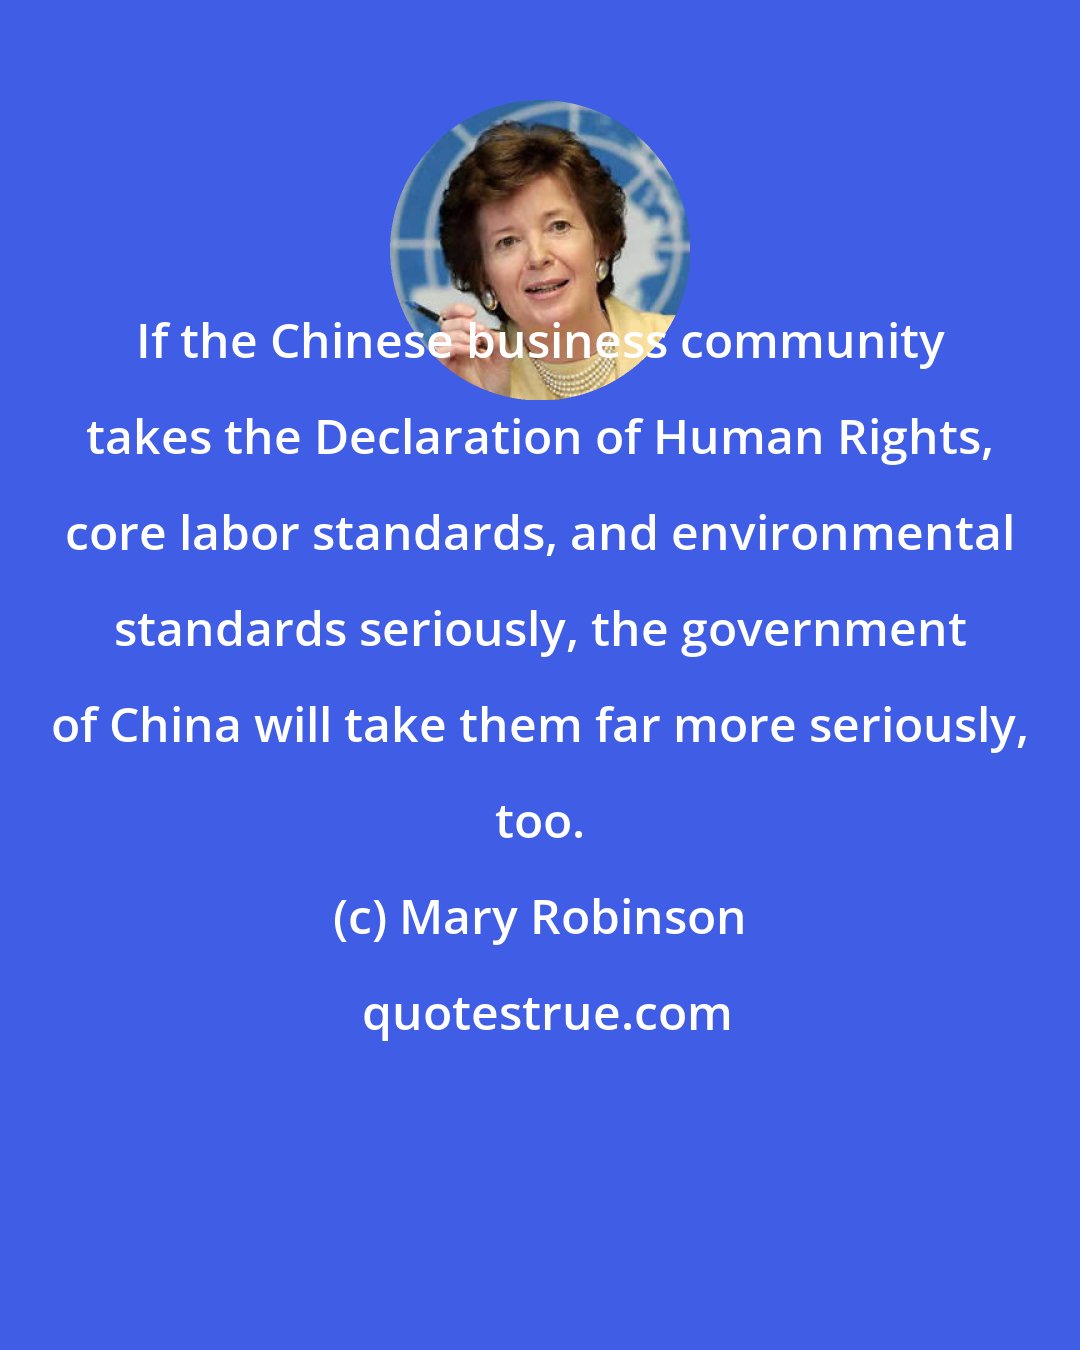 Mary Robinson: If the Chinese business community takes the Declaration of Human Rights, core labor standards, and environmental standards seriously, the government of China will take them far more seriously, too.